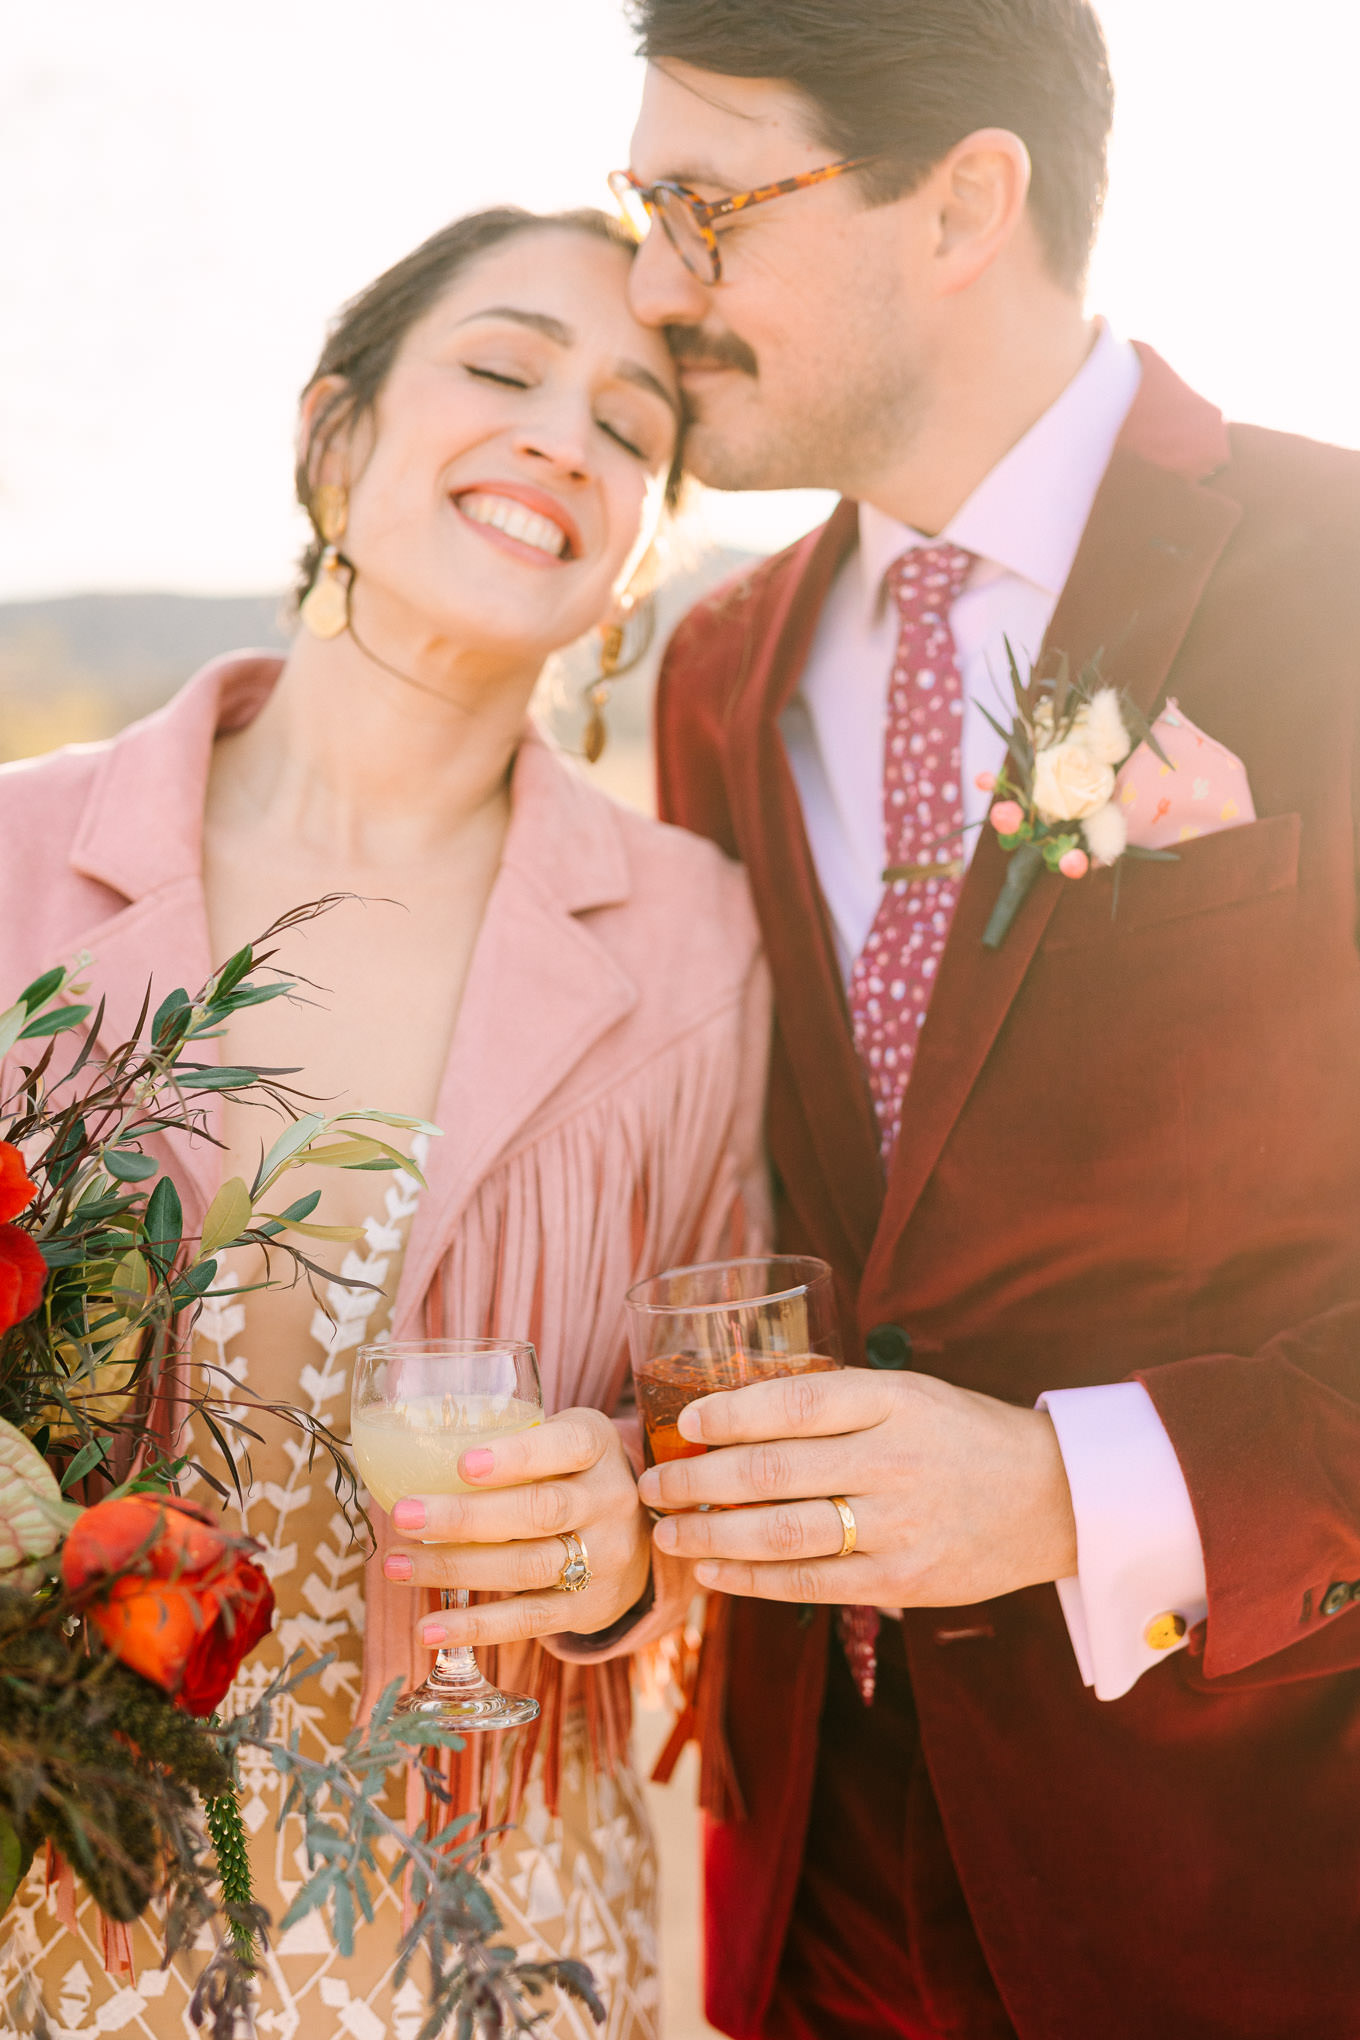 Rimrock Ranch wedding in Pioneertown | Wedding and elopement photography roundup | Los Angeles and Palm Springs  photographer | #losangeleswedding #palmspringswedding #elopementphotographer

Source: Mary Costa Photography | Los Angeles